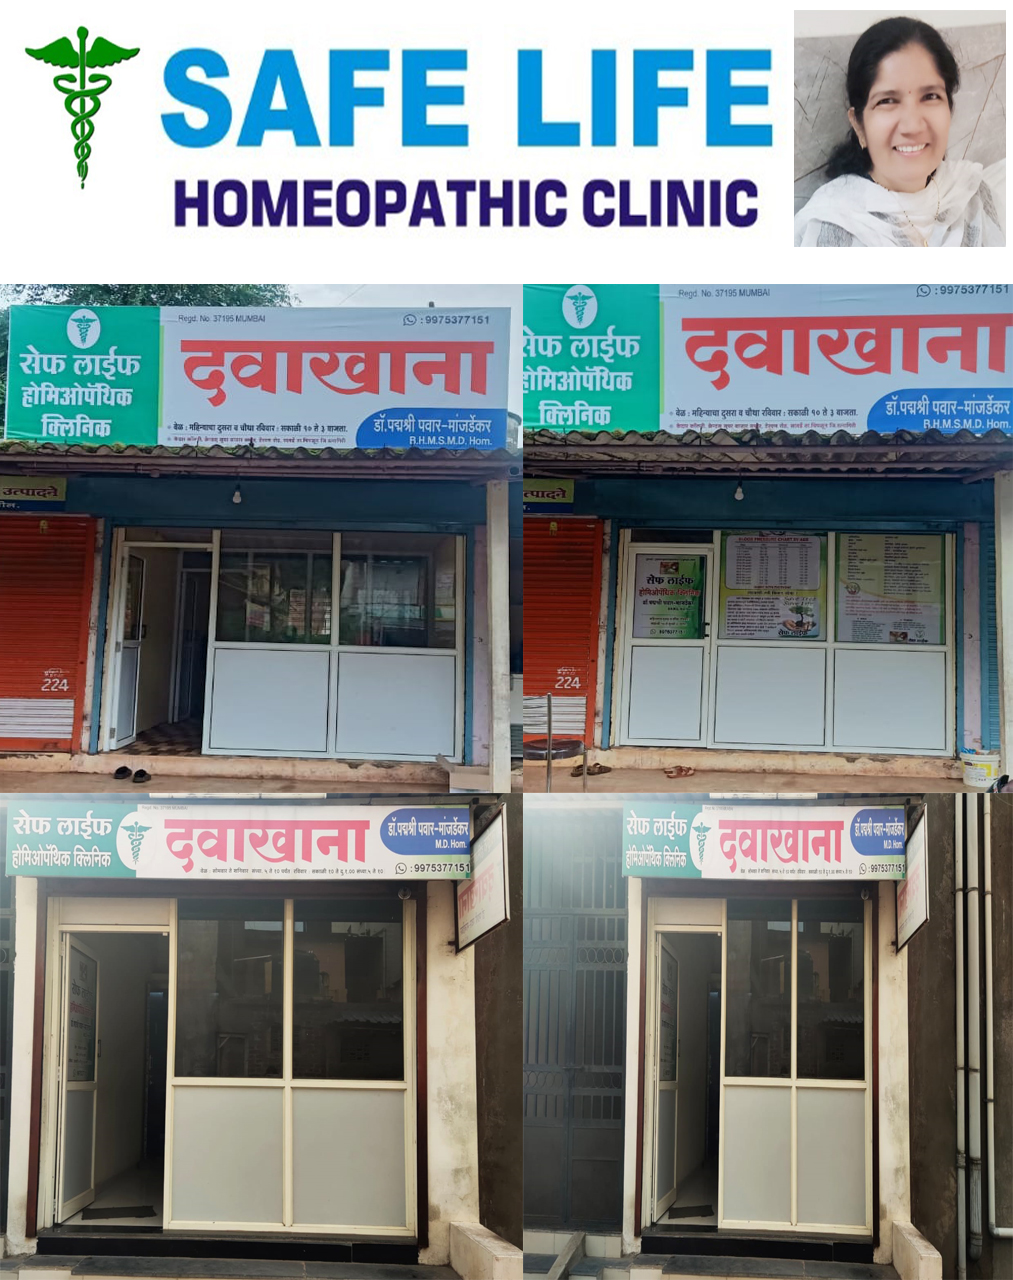 SAFE LIFE HOMEOPATHIC CLINIC